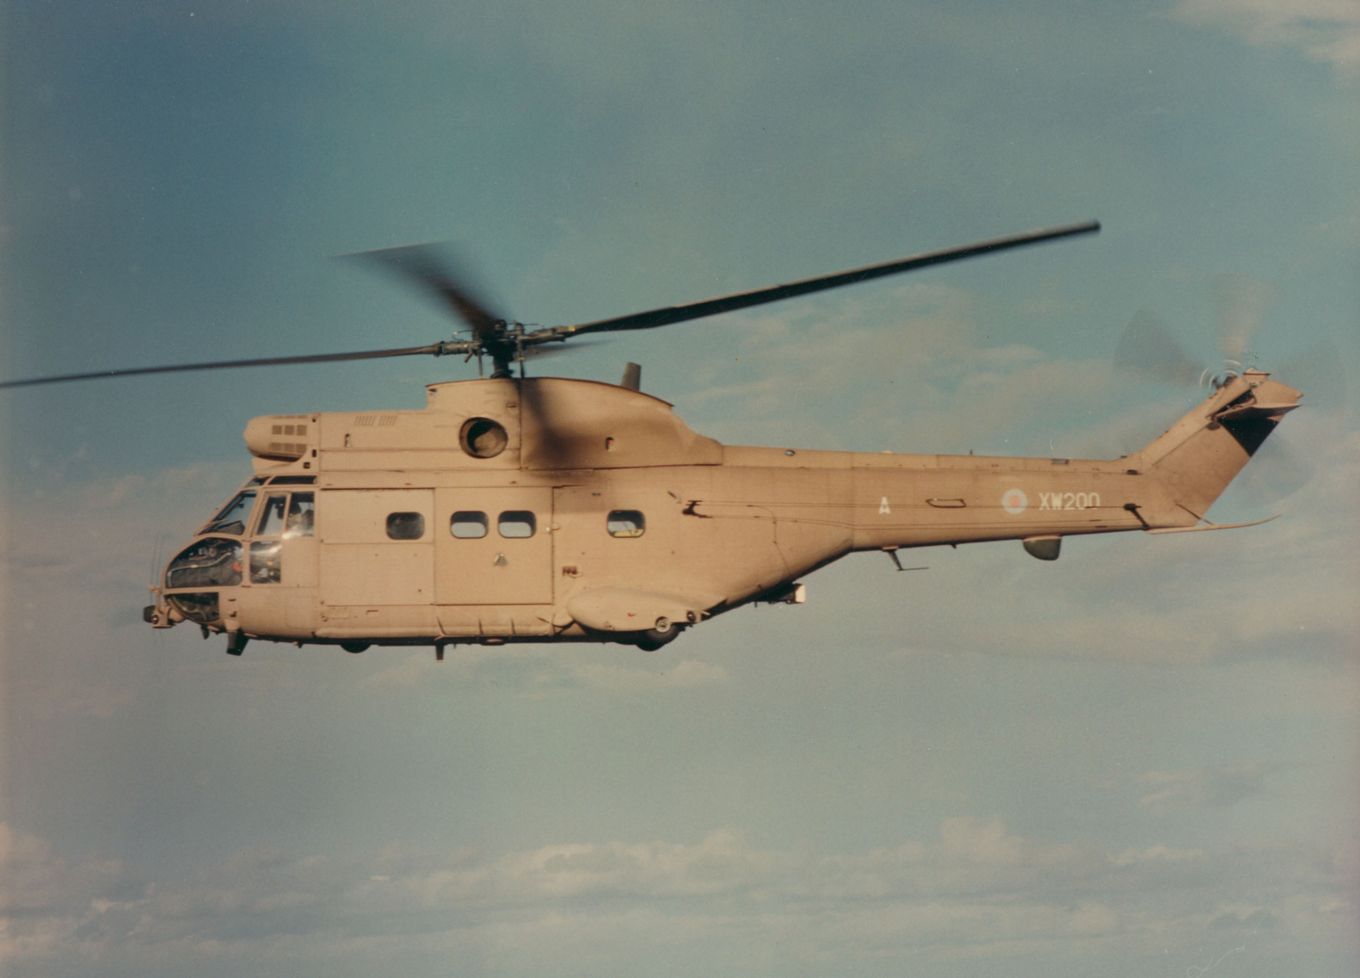 Image shows an RAF Puma helicopter flying.